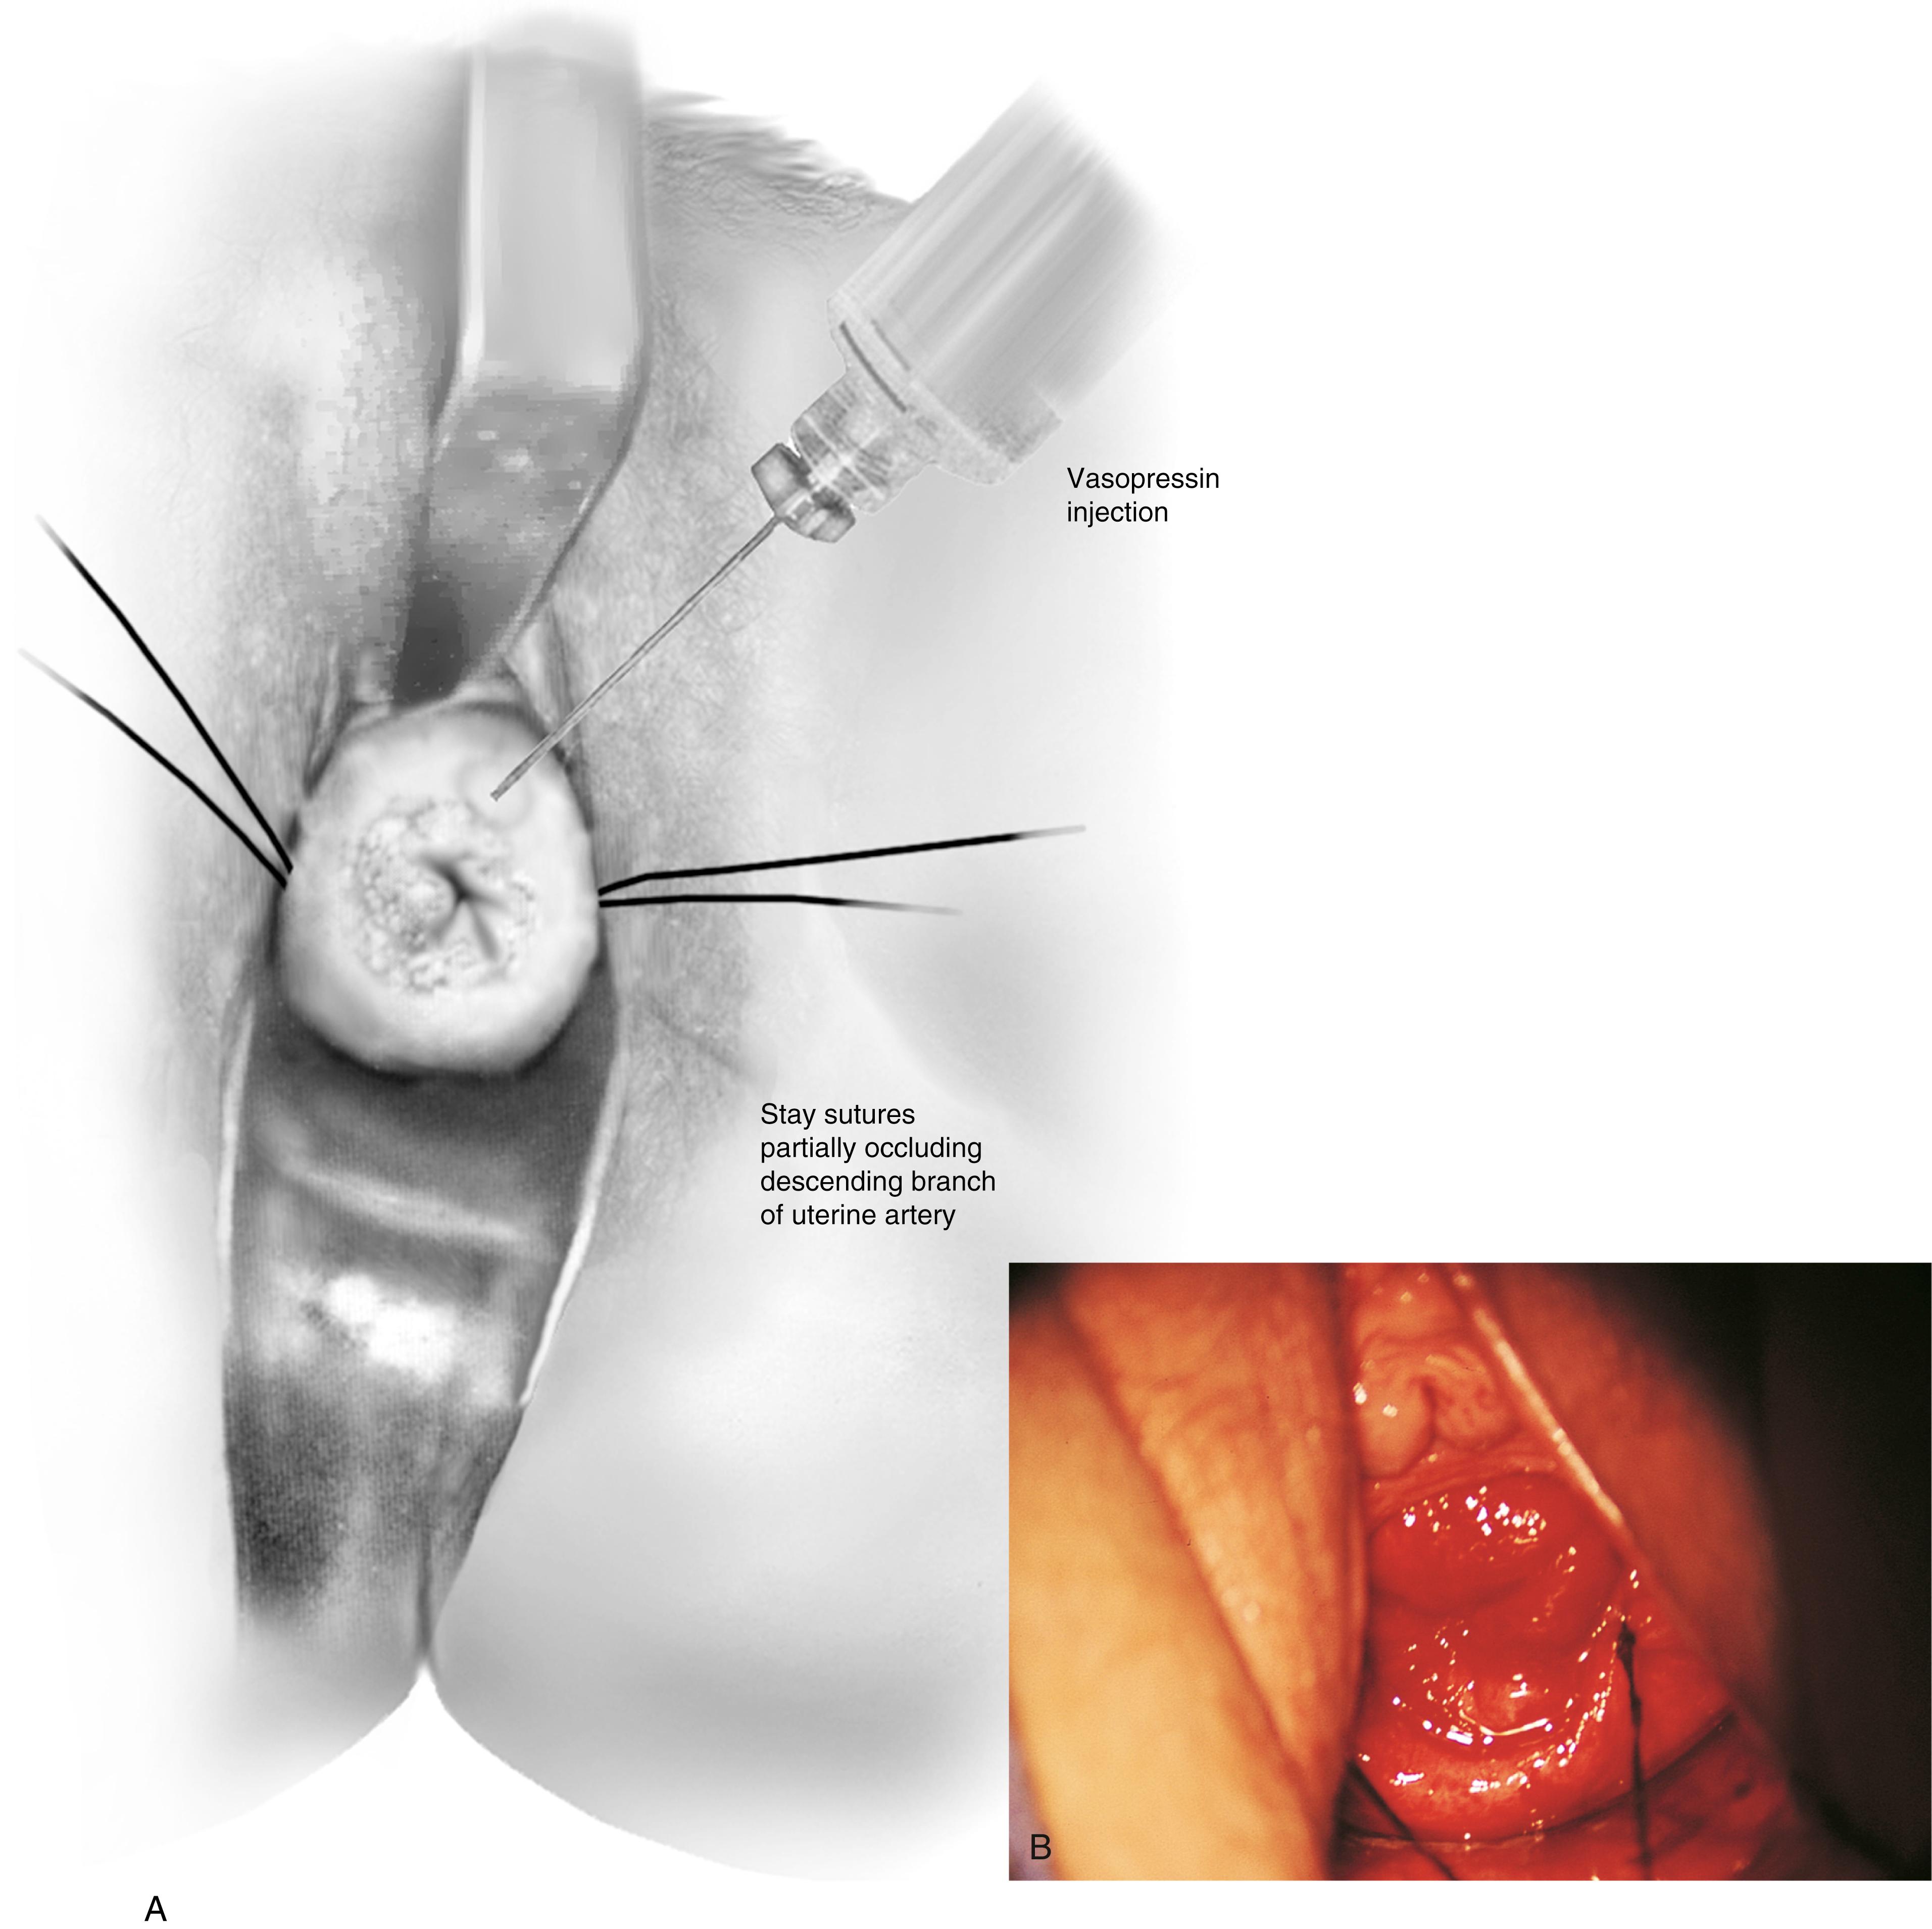 FIG. 44.1, A. Two sutures of 0 Vicryl have been placed into the lateral aspect of the cervix at the 9-o’clock and 3-o’clock locations. These are placed to diminish bleeding and to stabilize the cervix during surgery. B. The stay sutures are pulled downward to better expose the cervix. Even with a deep retractor placed posteriorly, the vagina bulges beneath the posterior cervix.